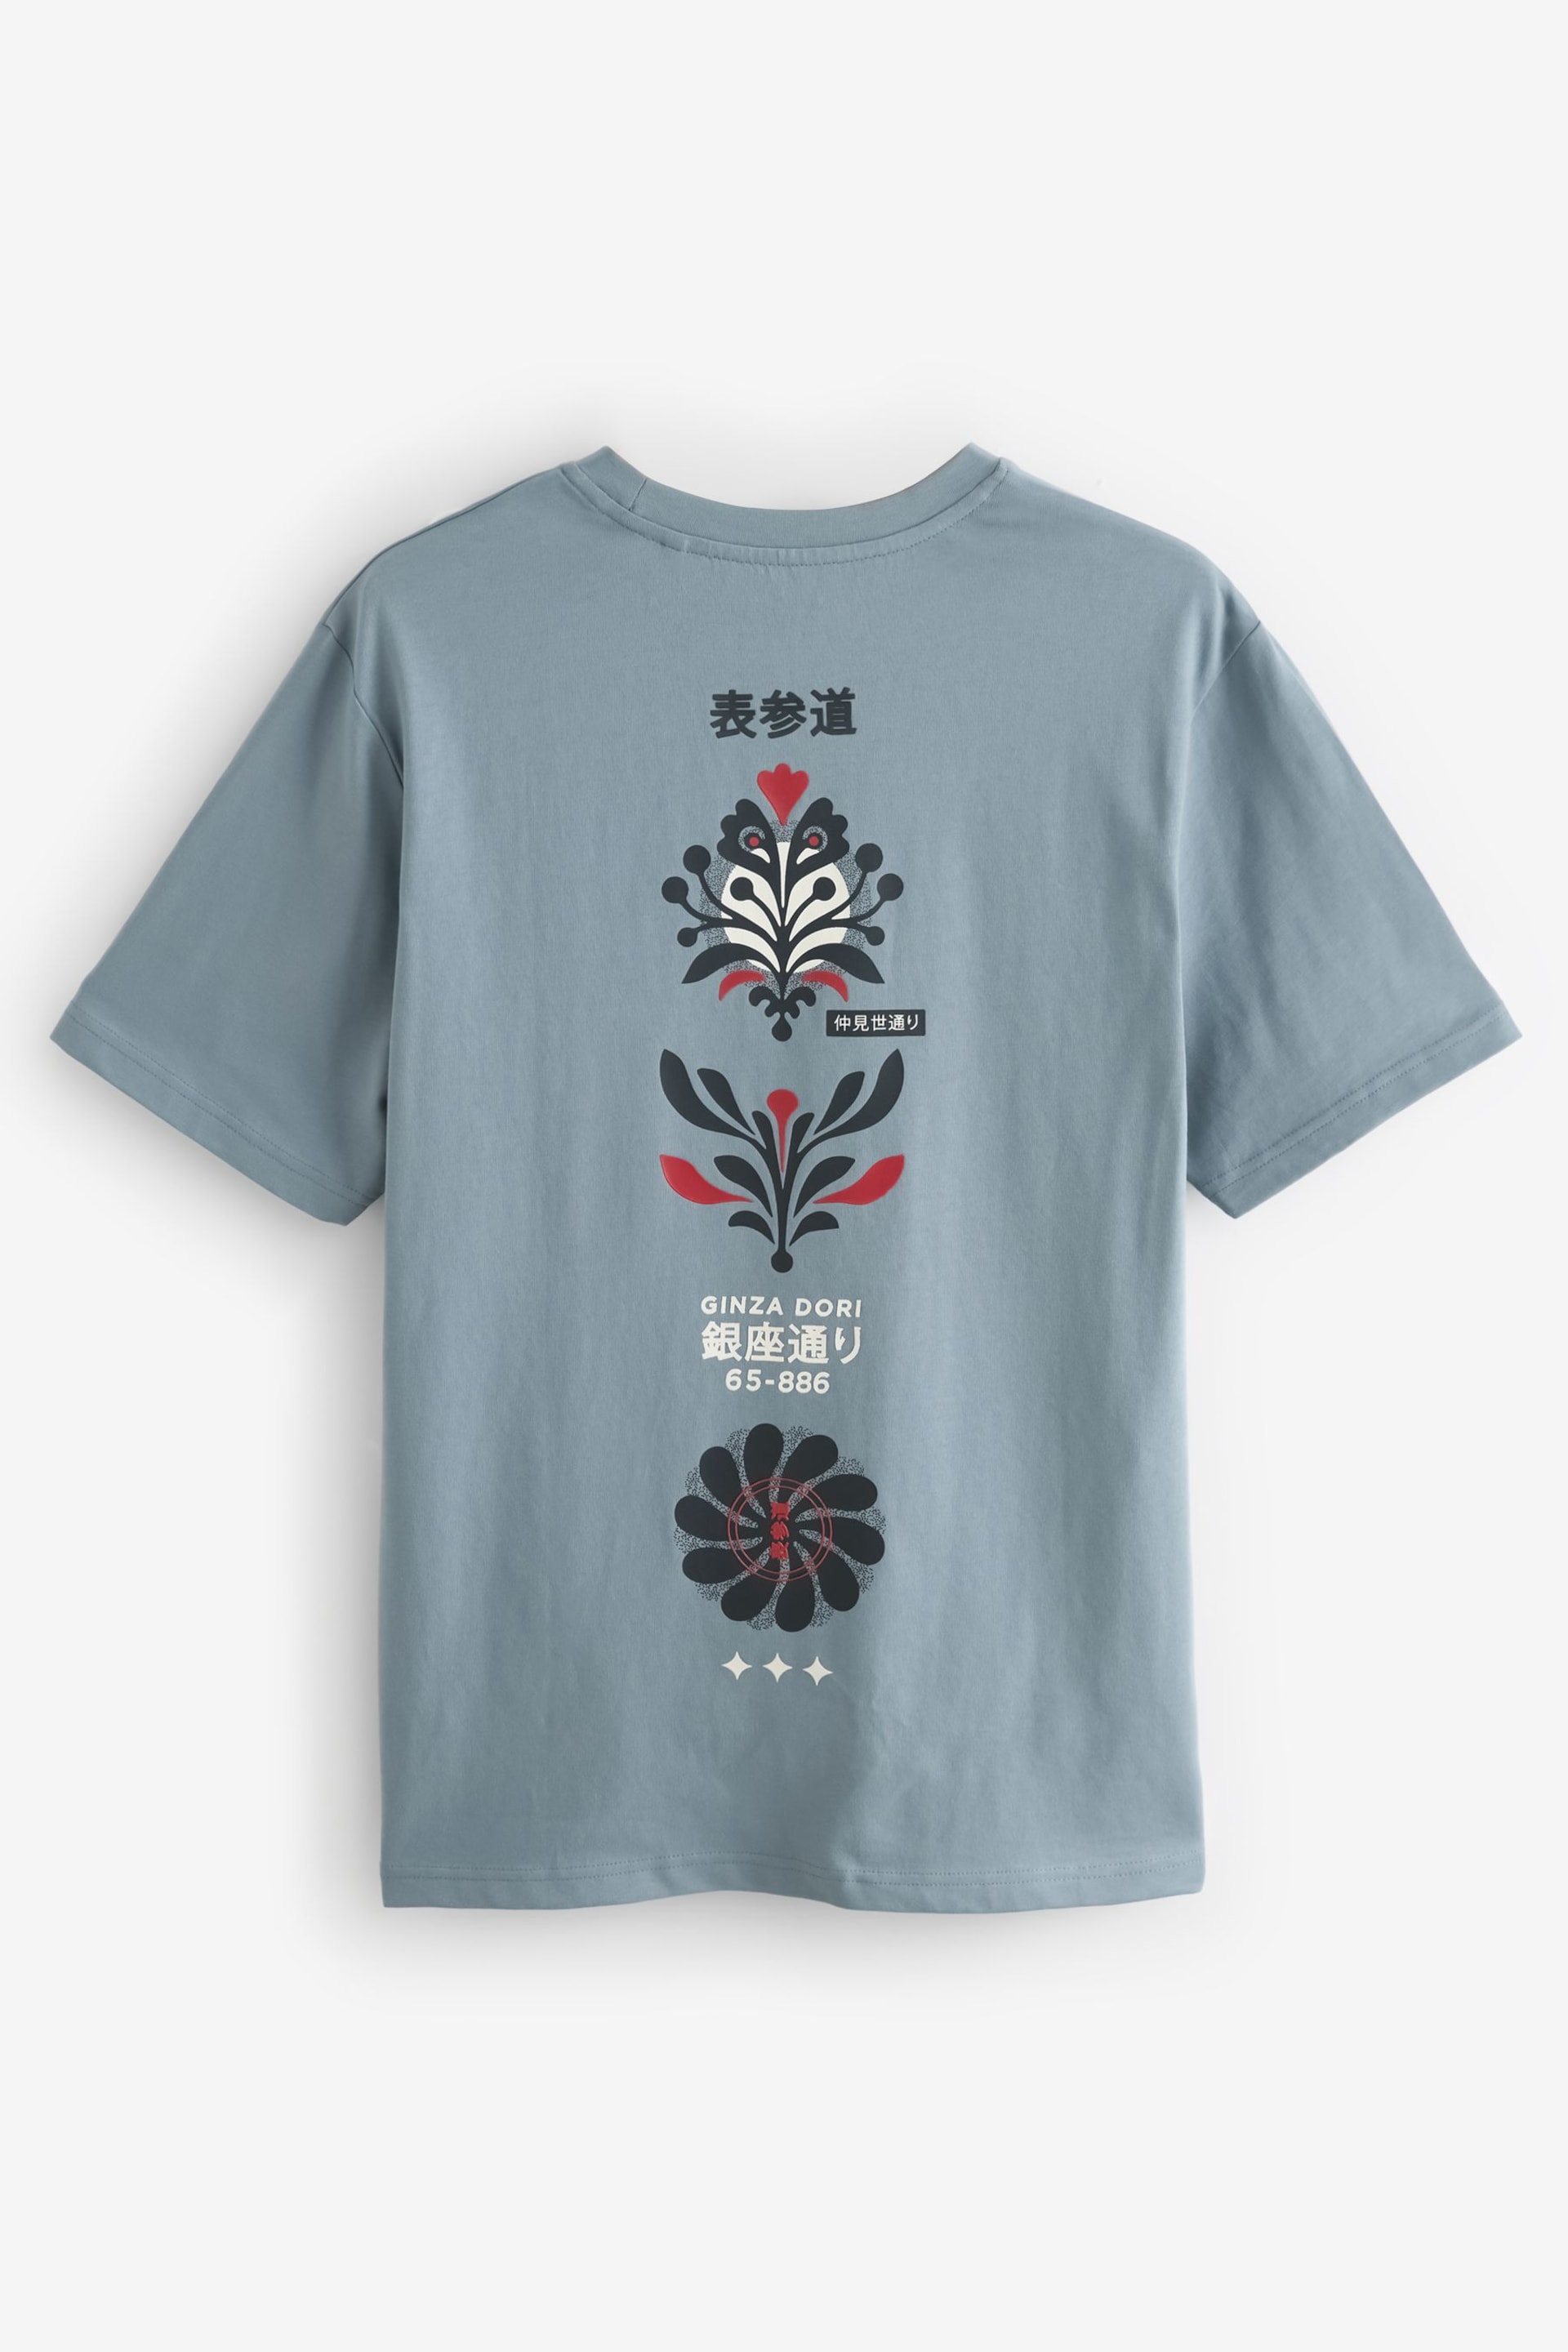 Blue Relaxed Fit Japanese Back Print Graphic T-Shirt - Image 6 of 8